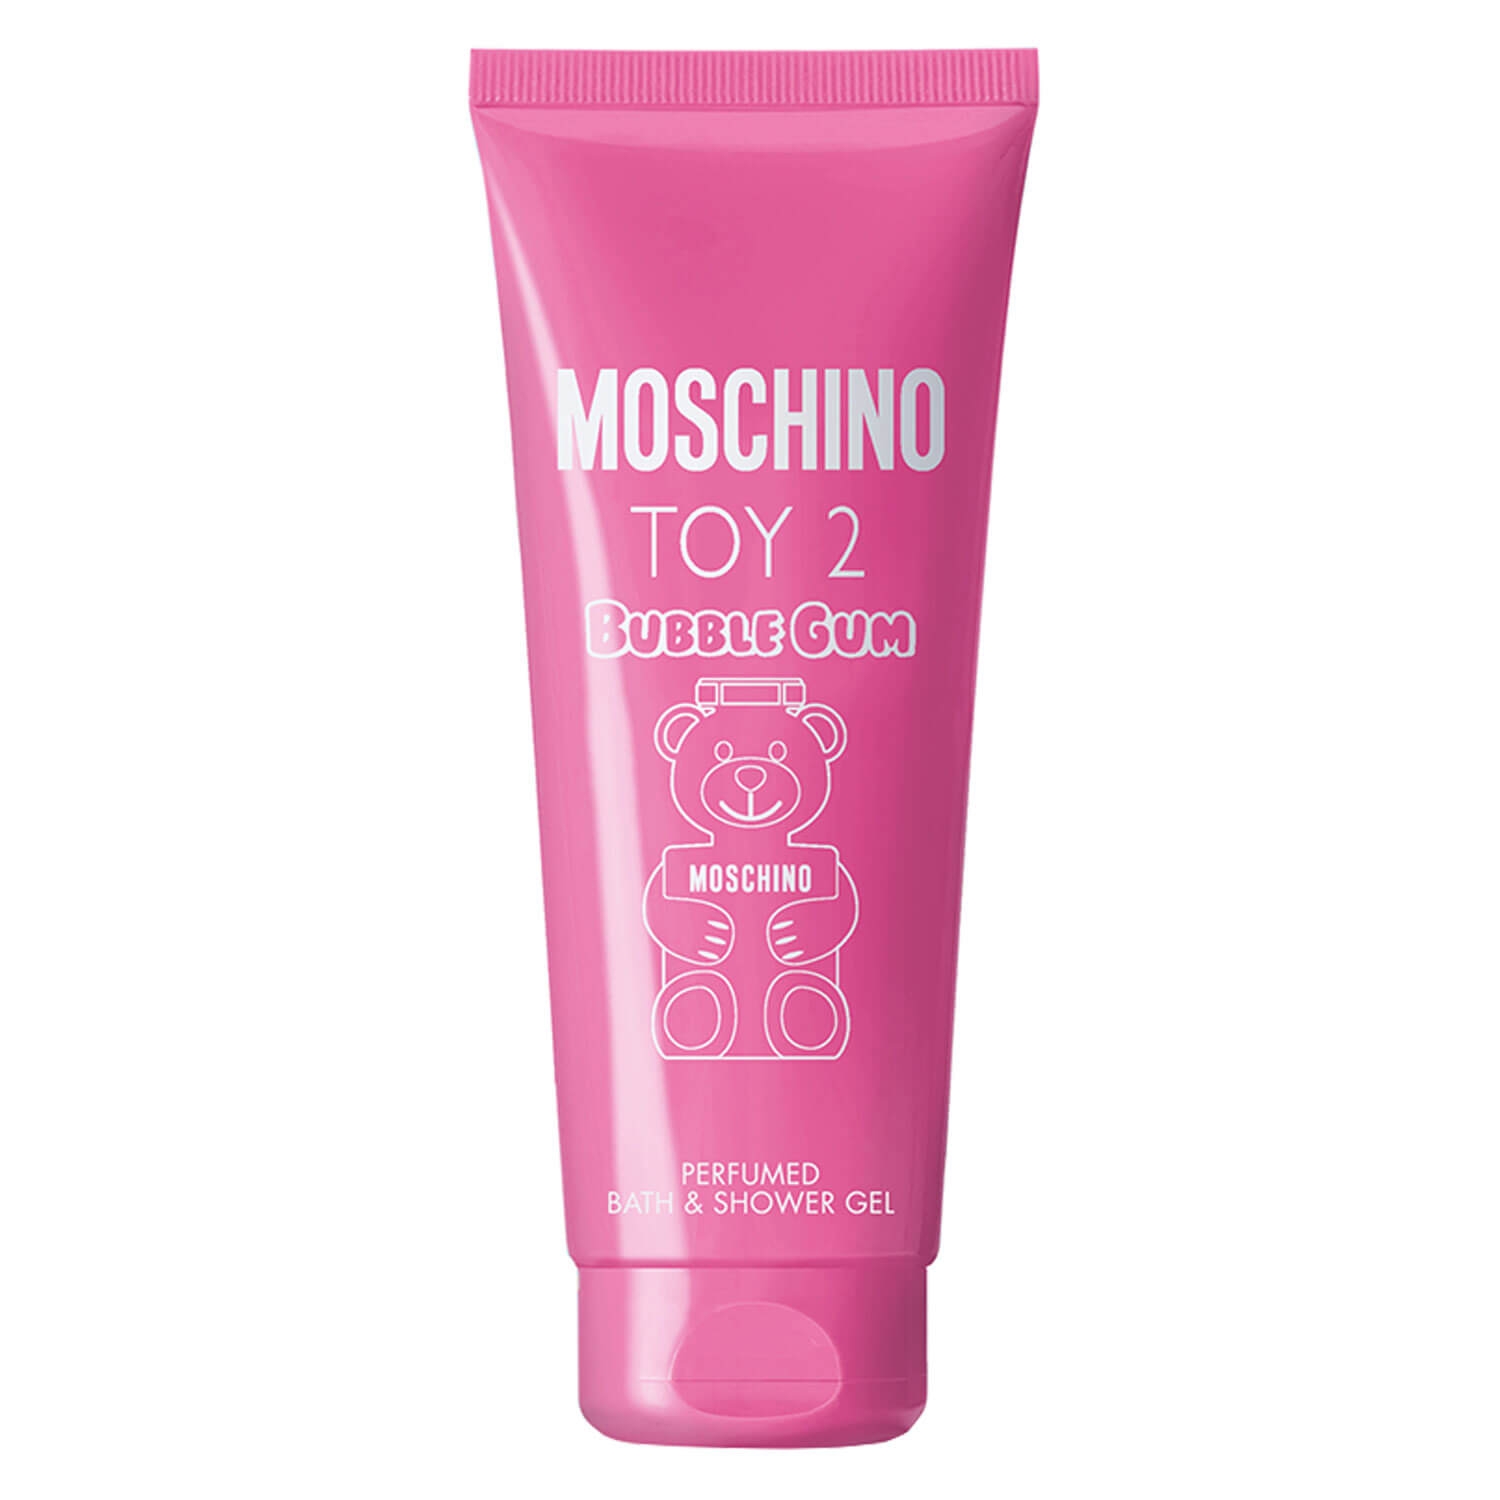 Product image from TOY 2 Bubble Gum - Perfumed Bath & Shower Gel Tube